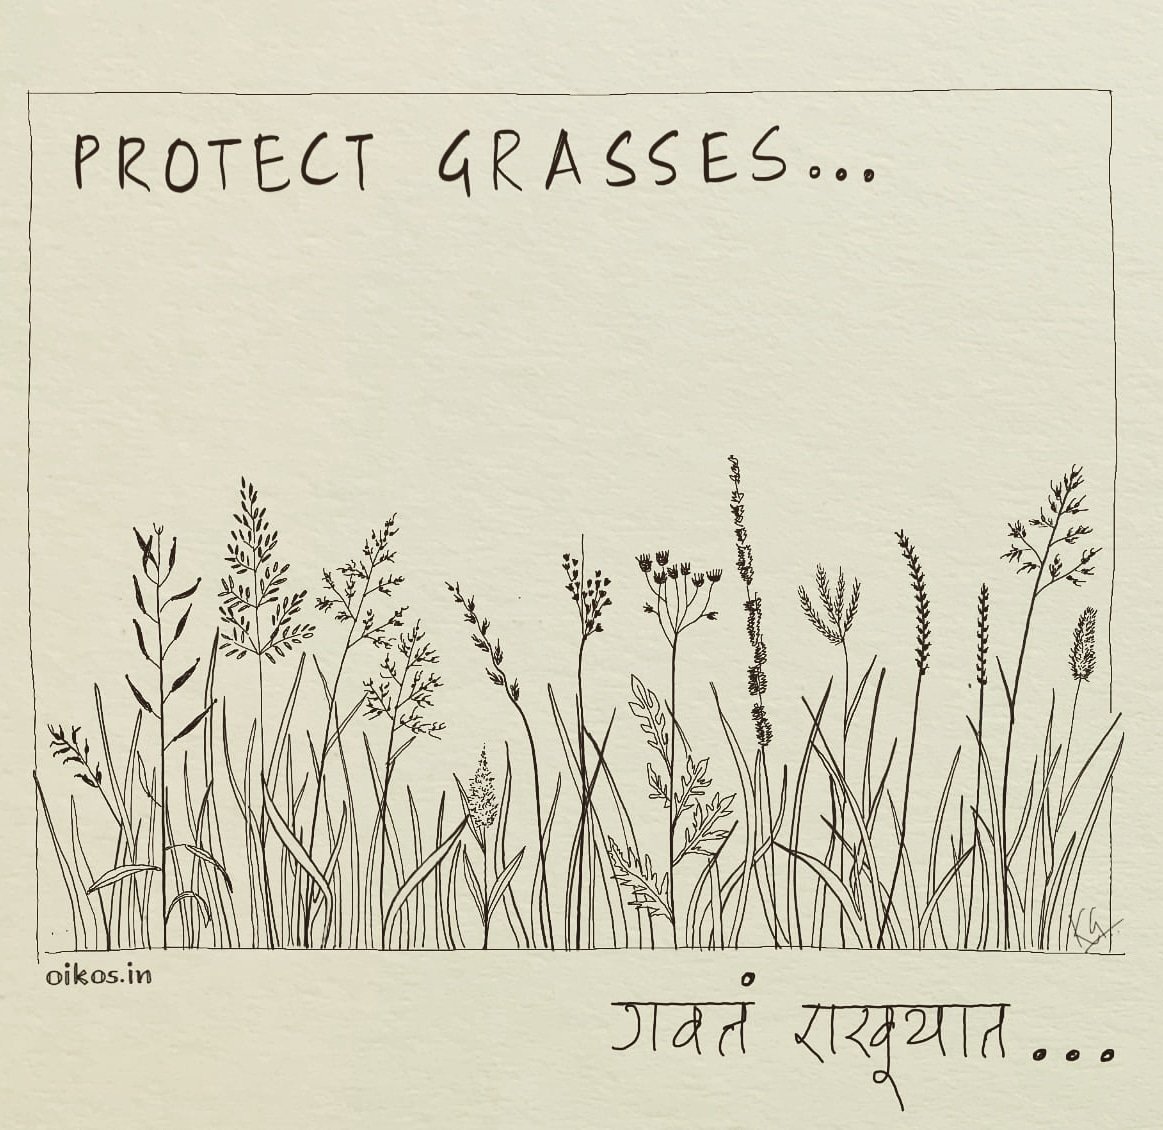 🌿 21 acts for Nature conservation !! निसर्ग संवर्धंनासाठी २१ उपक्रम !!

17. Protect grass cover 🌾
(Semi-urban - Rural areas)

Native grasses and it's biomass is wealth for any degraded land !

#oikos_pune #protectgrasses #GrowNatives #ProtectNativeGrass